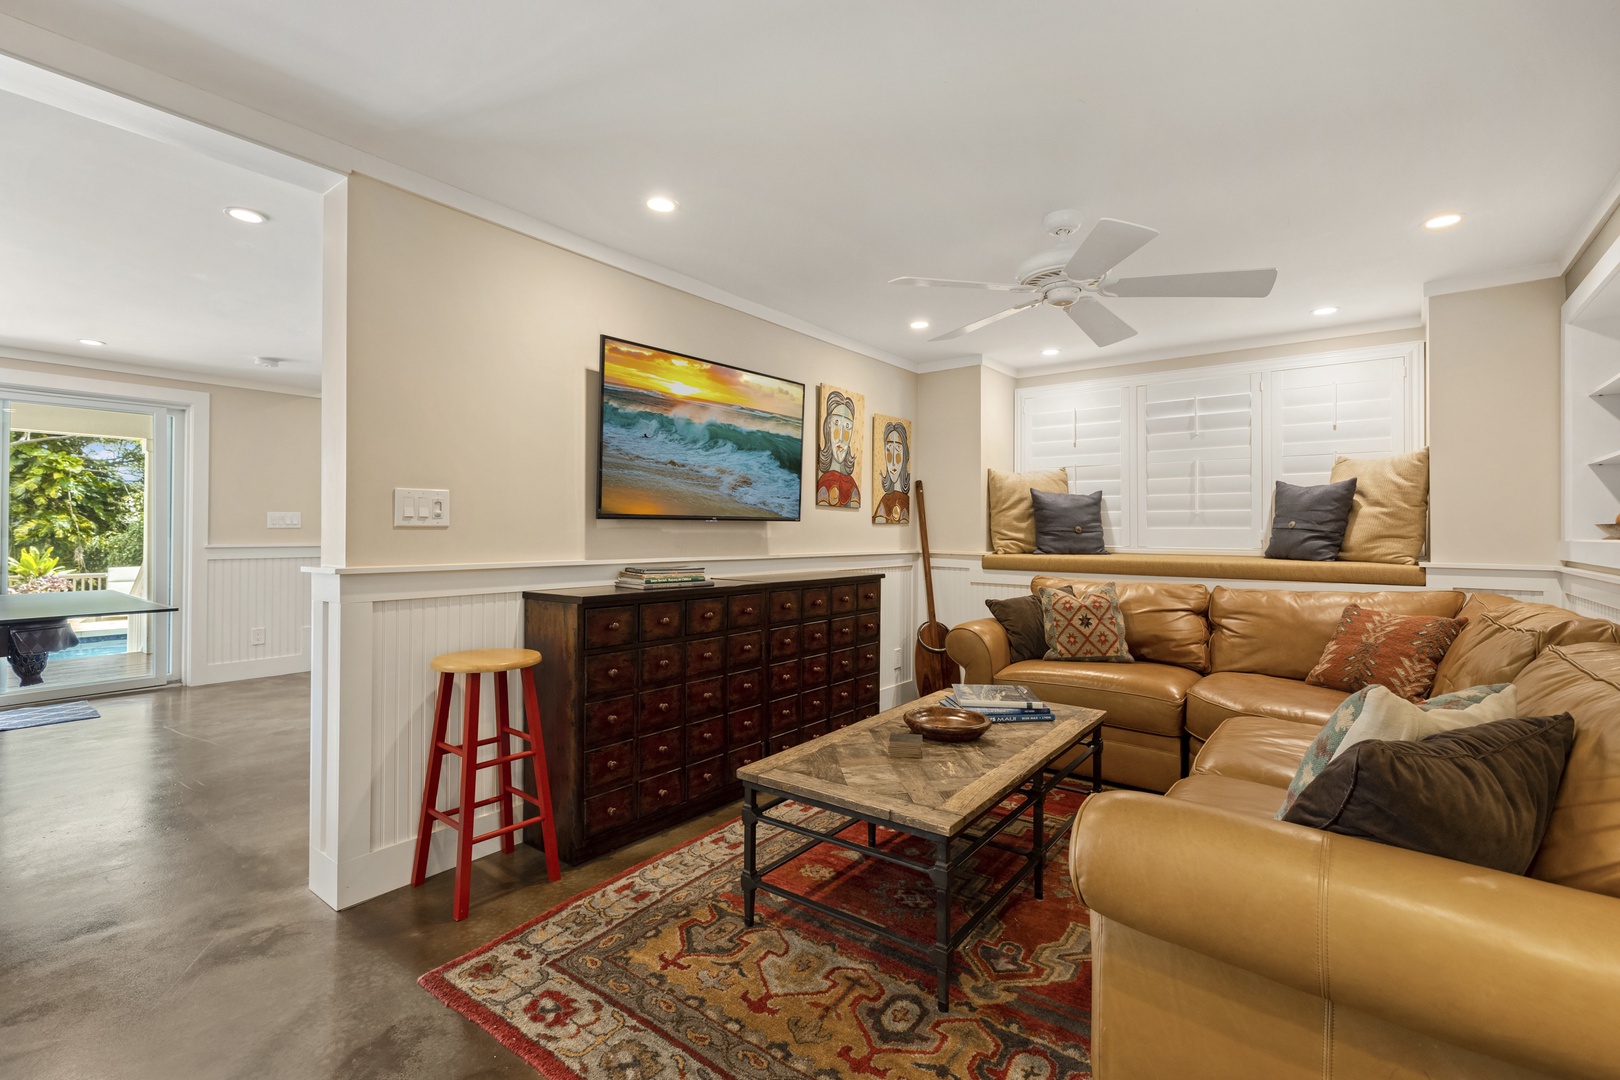 Honolulu Vacation Rentals, Hale Le'ahi - Relax and unwind in the downstairs lounge area